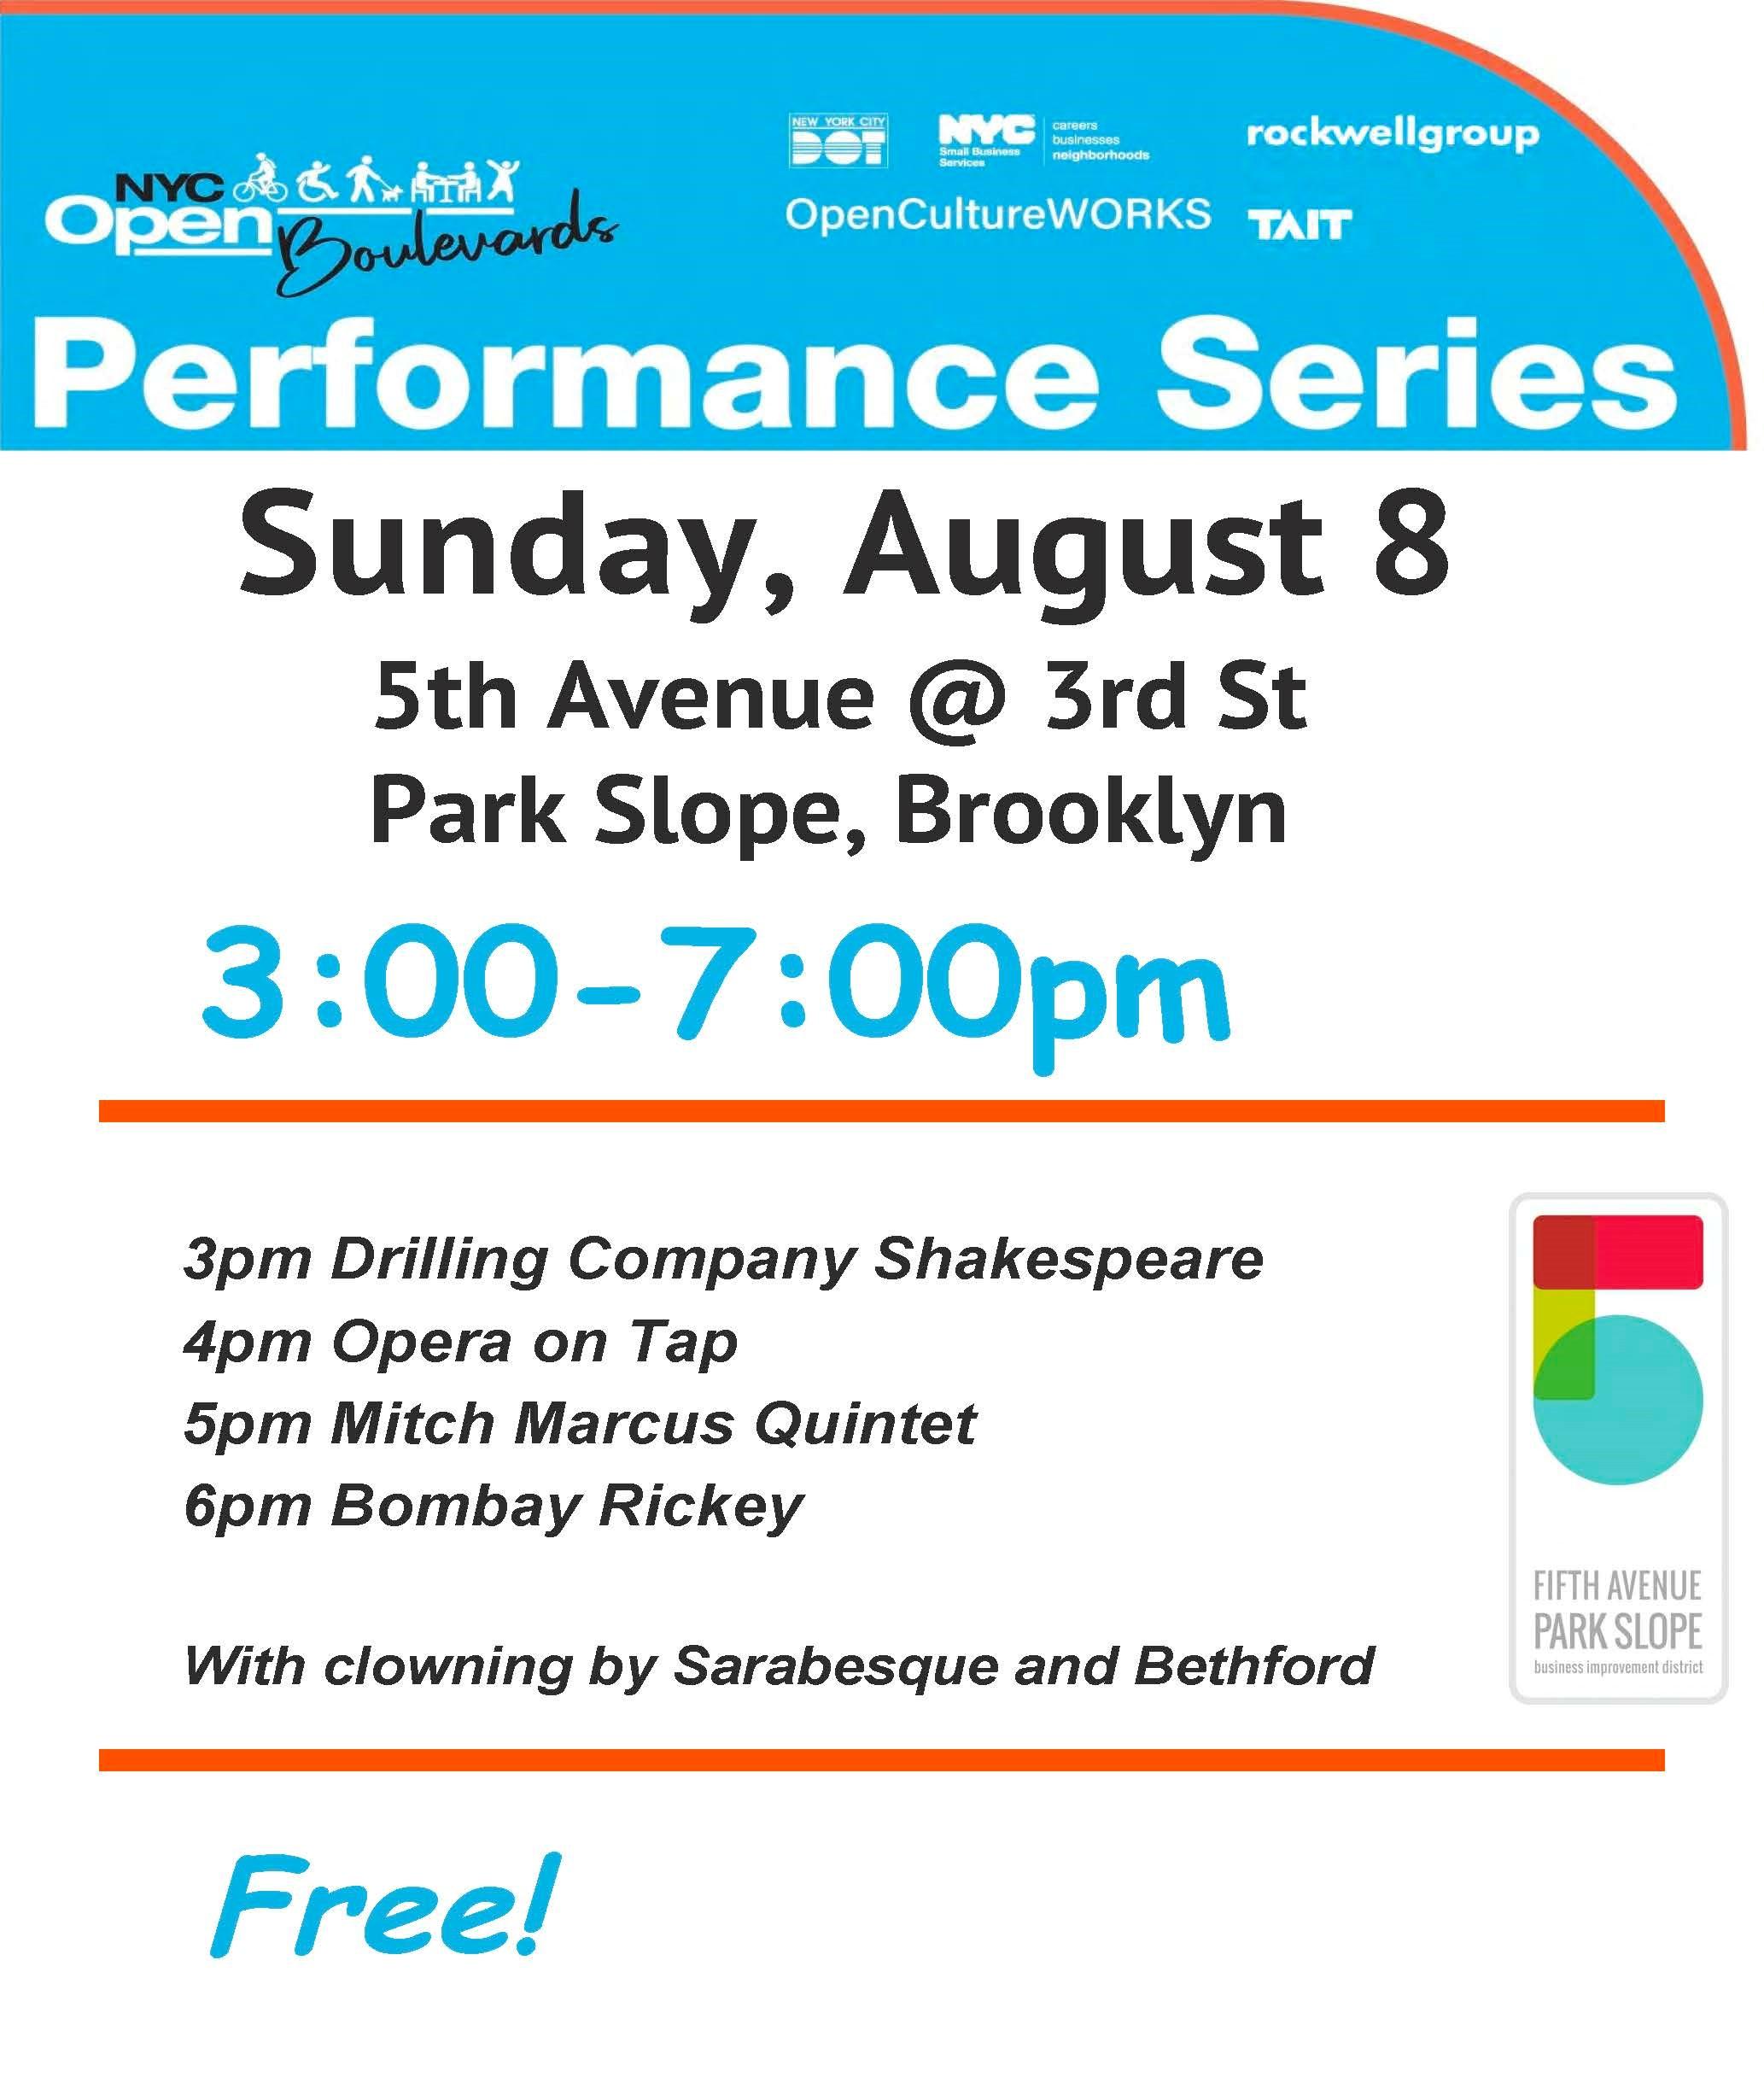 OPERACADES at the Open Boulevards Performance Series